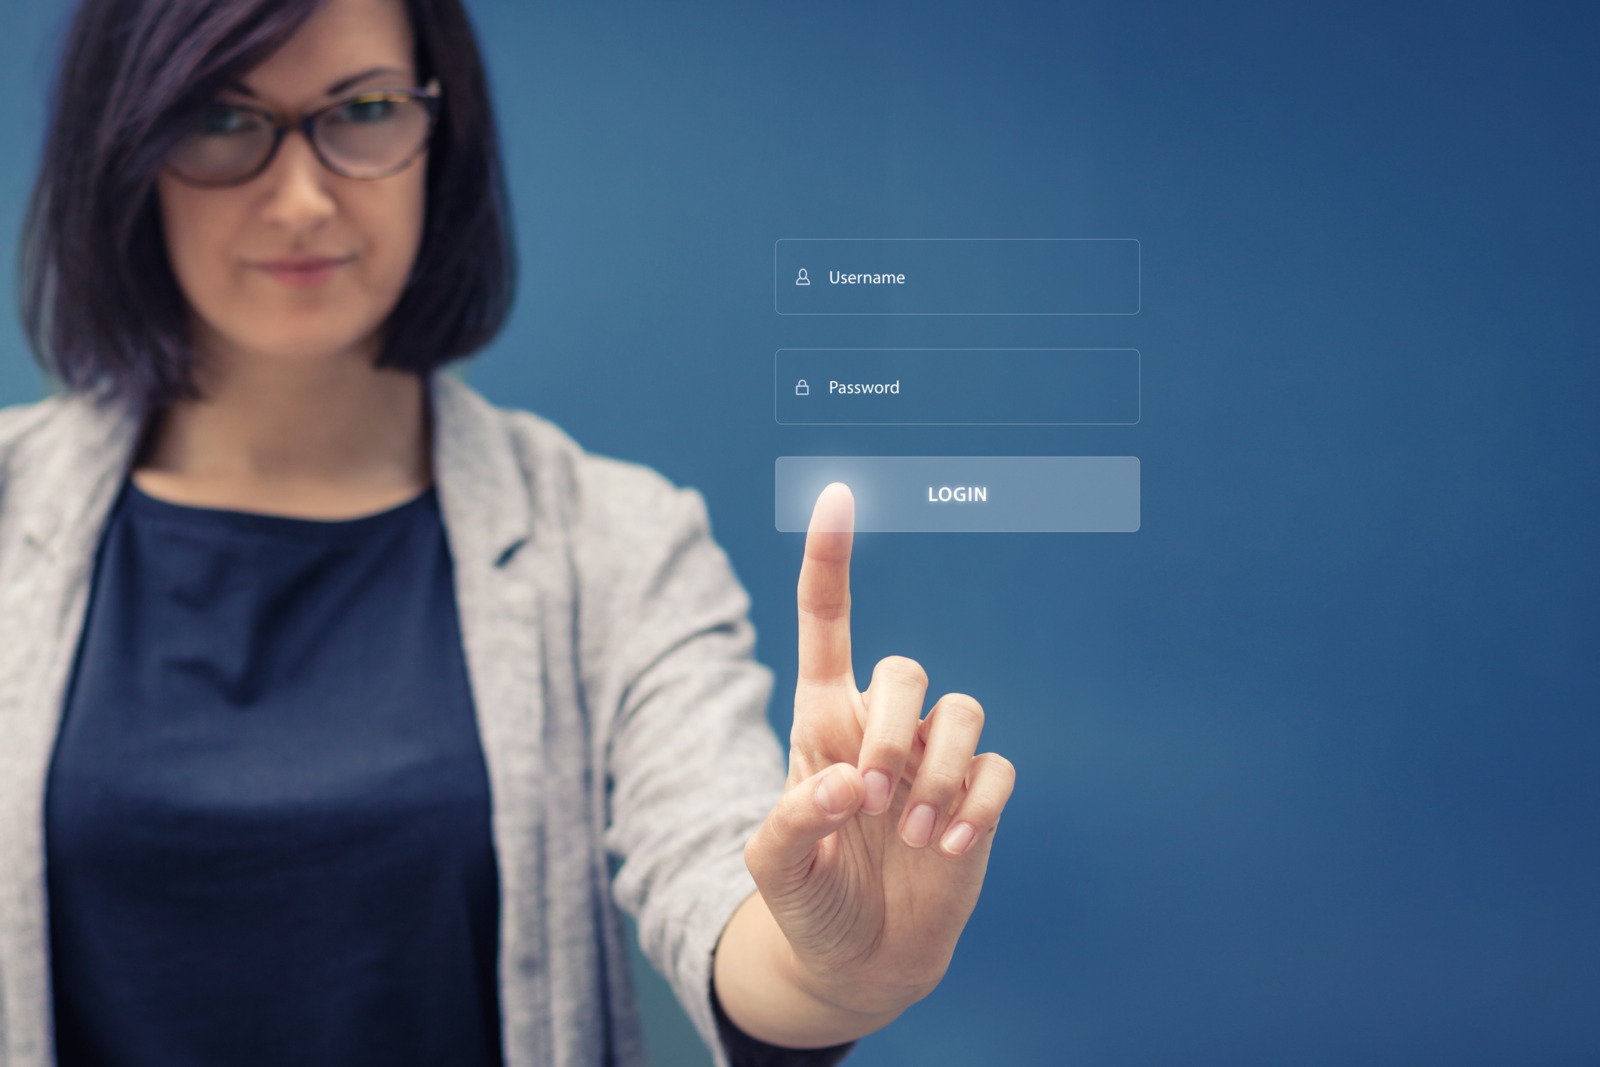 Create a More Seamless, Secure User Experience with Single Sign-On (SSO)